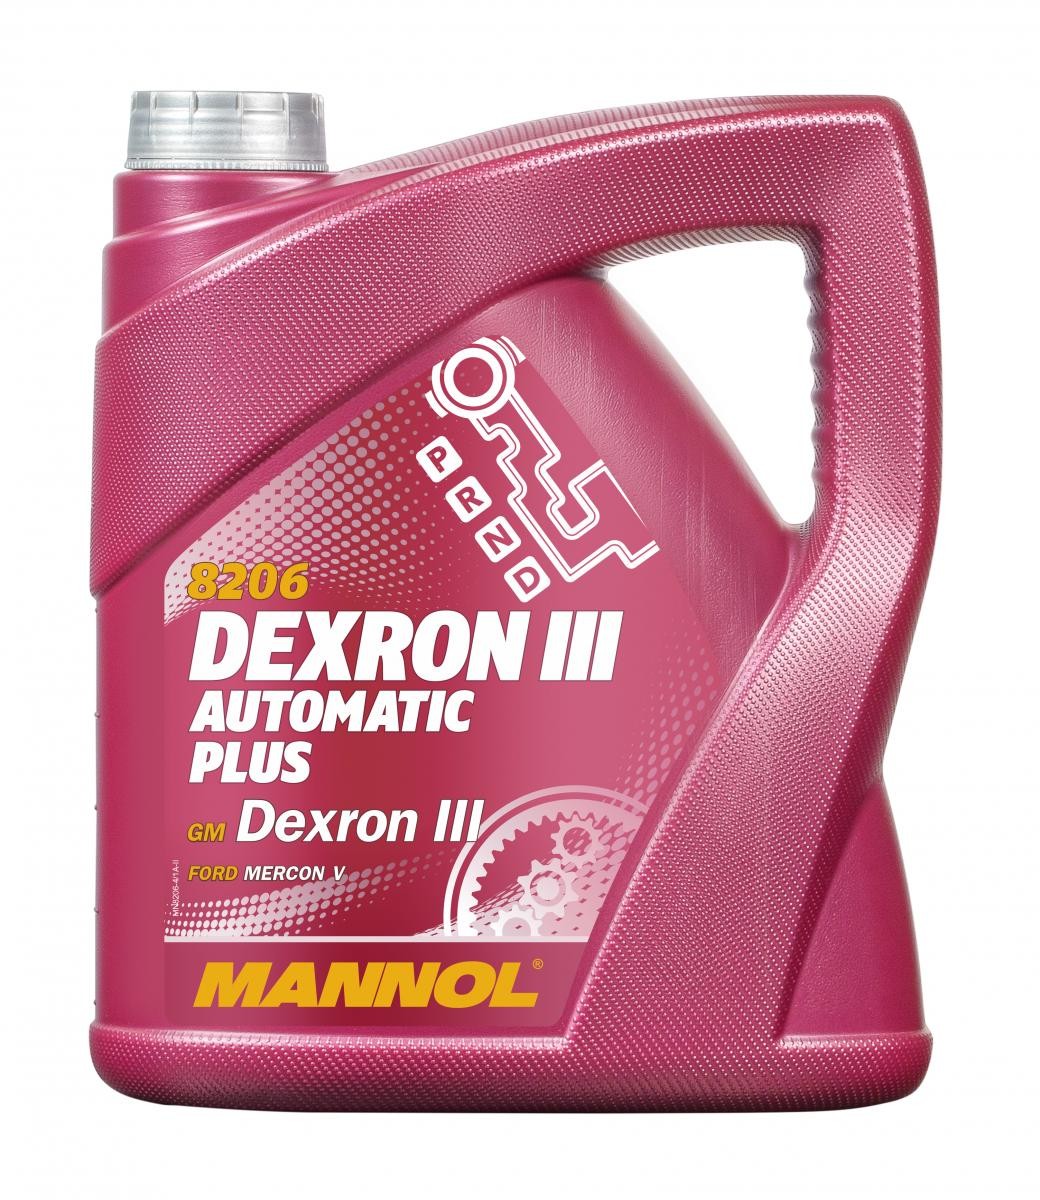 MANNOL MN8206-4 Dexron III Automatic, Plus ATF III, 4l, red Automatic transmission fluid MN8206-4 cheap